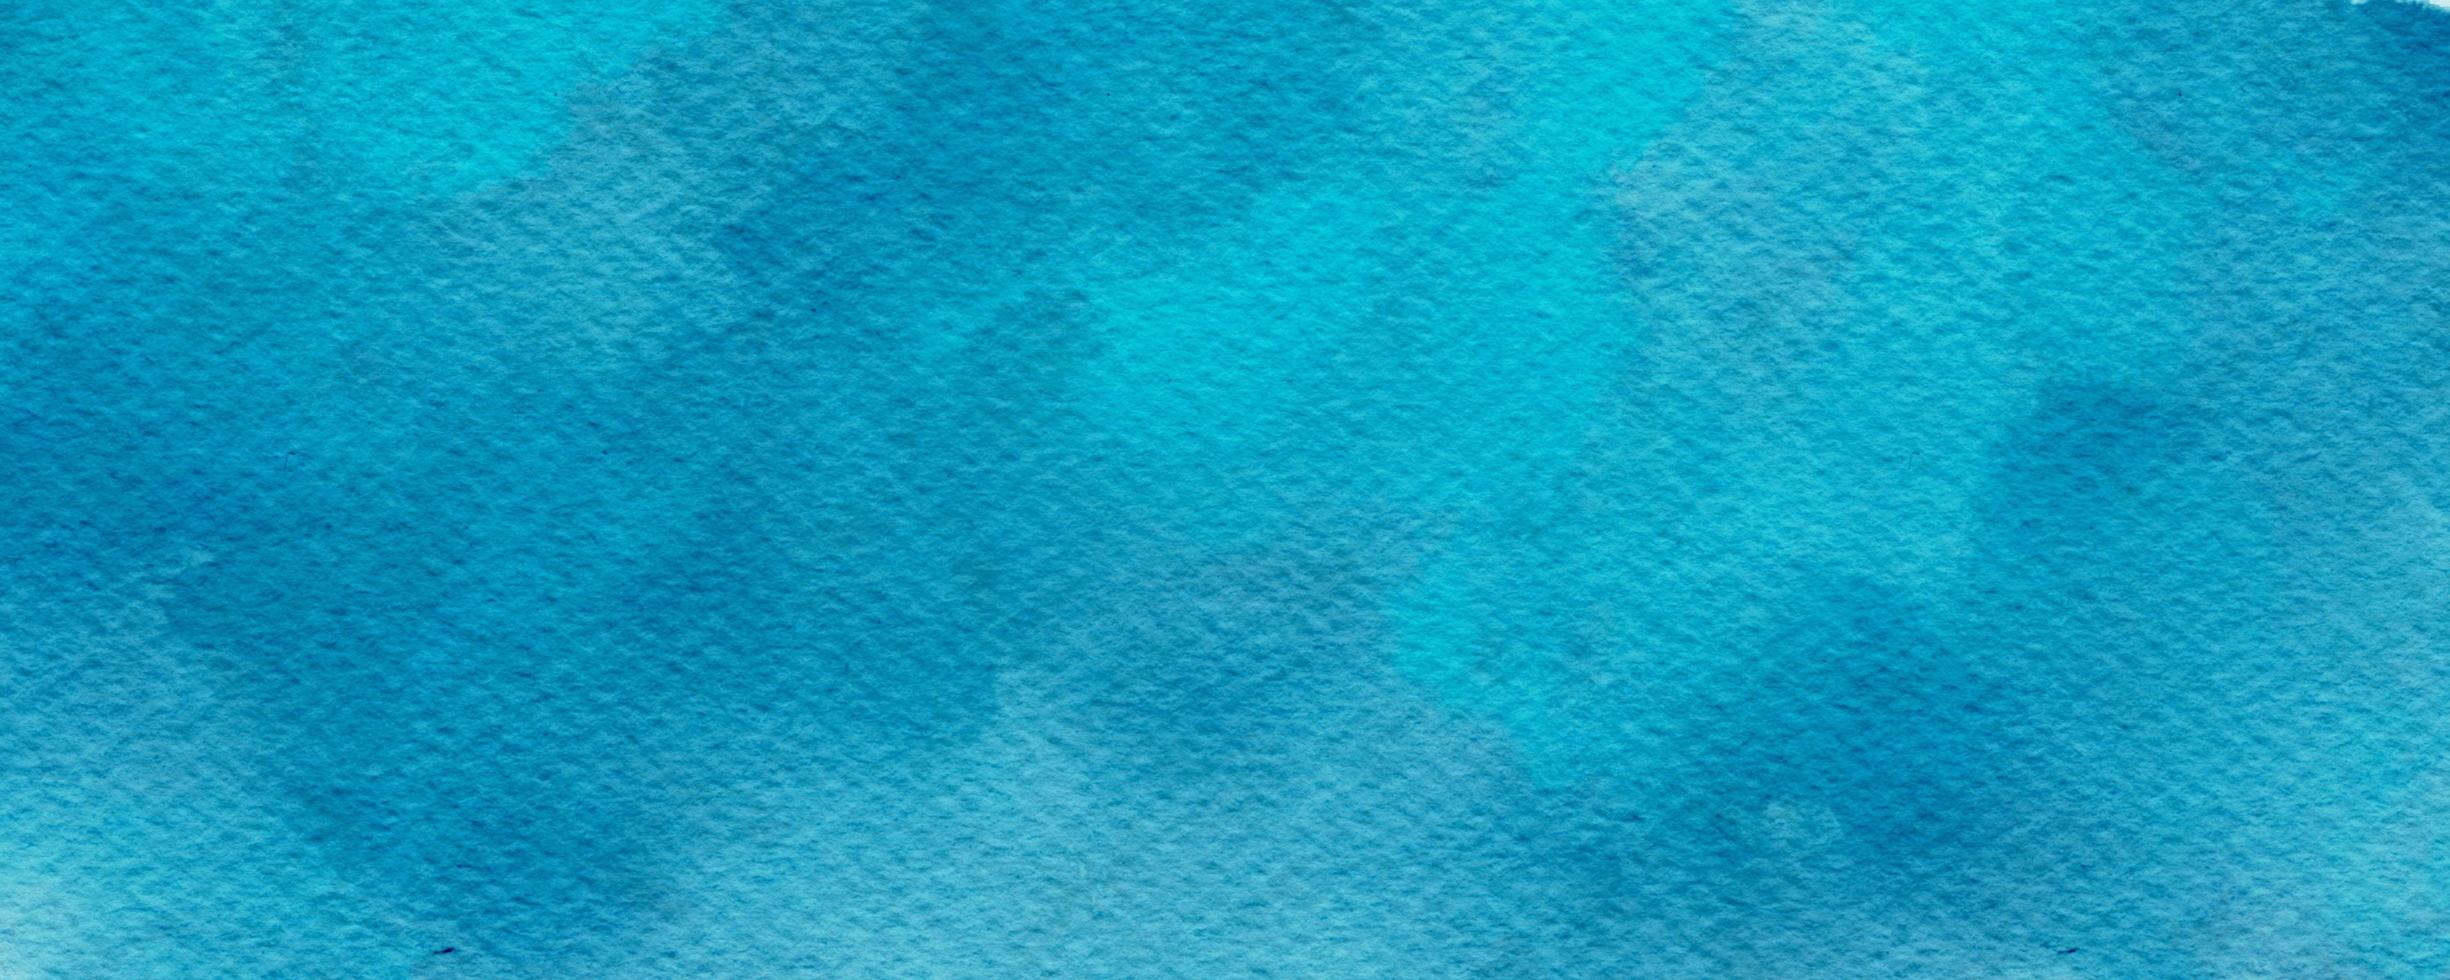 Turquoise Blue Watercolor abstract texture rectangle background photo